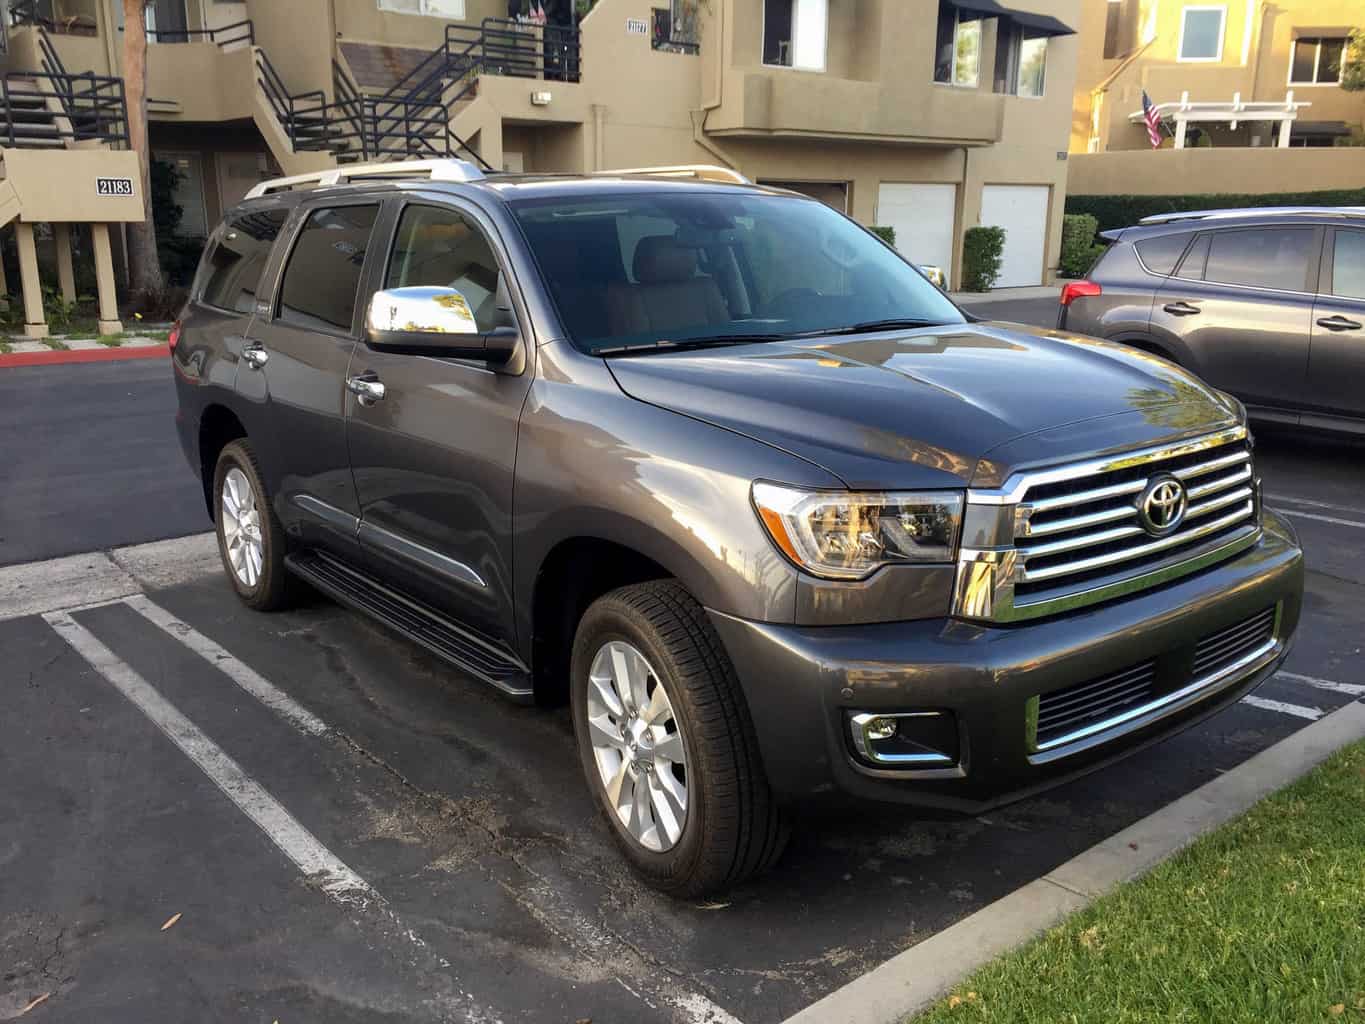 Are you looking to purchase a new SUV? Whether your road trips are quiet and mundane or similar to that of the Griswold’s adventure, from the movie, “National Lampoons Vacation”, there is no better vehicle to do it in comfort and style than in the 2018 Toyota Sequoia, Platinum Edition.